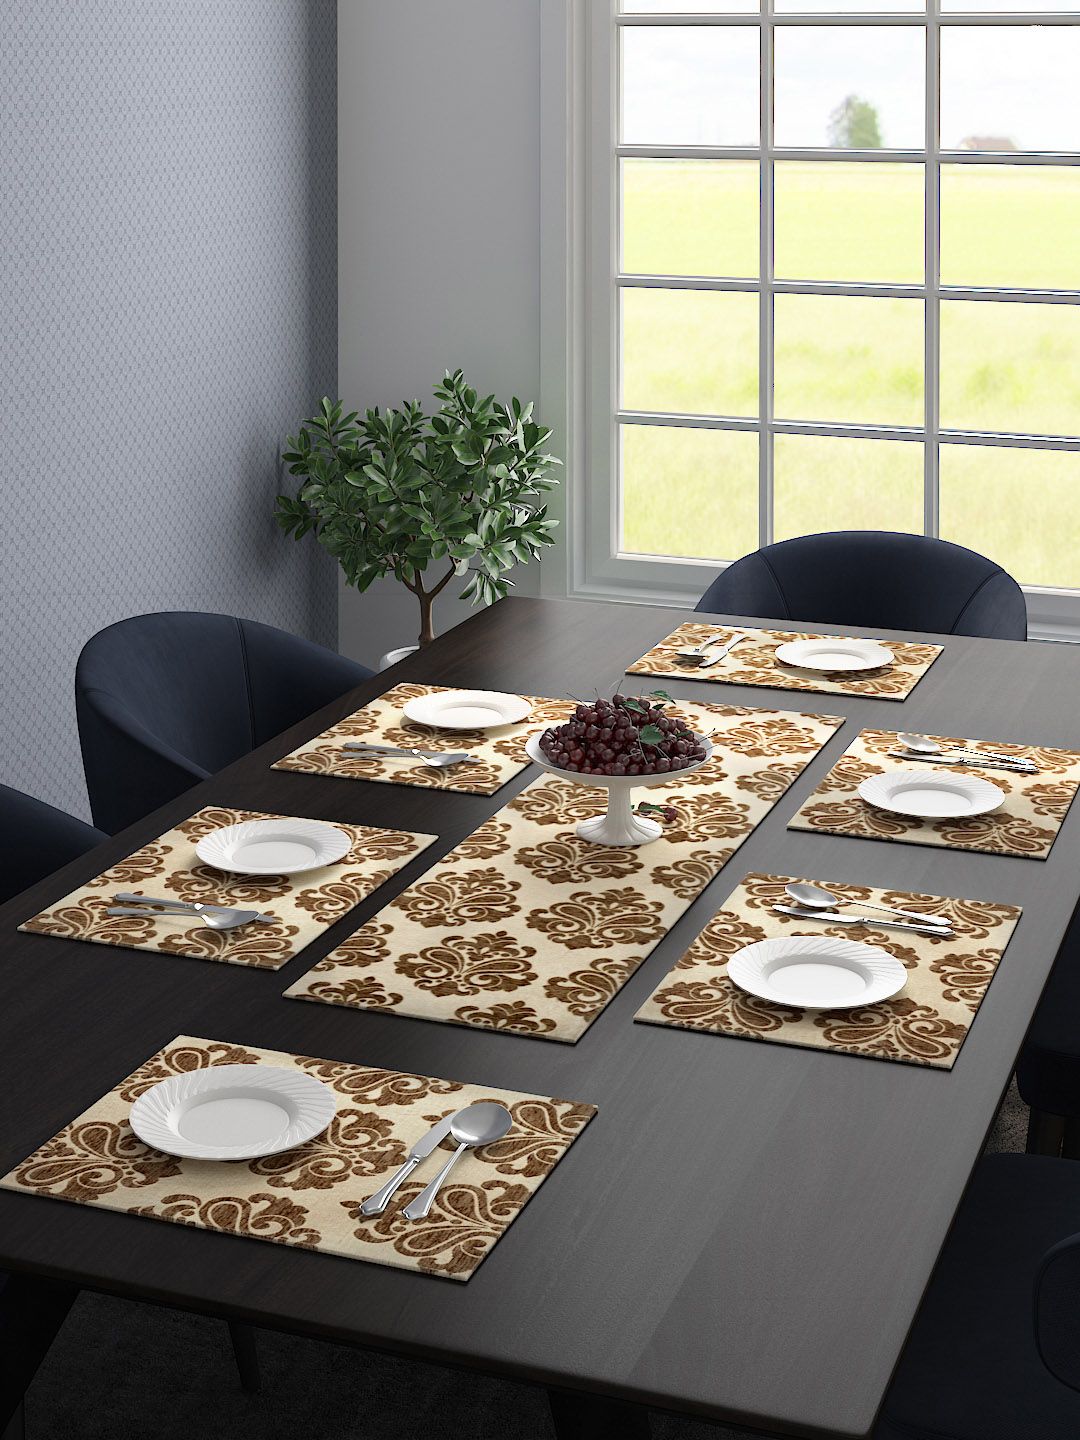 Saral Home Set Of 6 Printed Table Placemats & 1 Runner Price in India